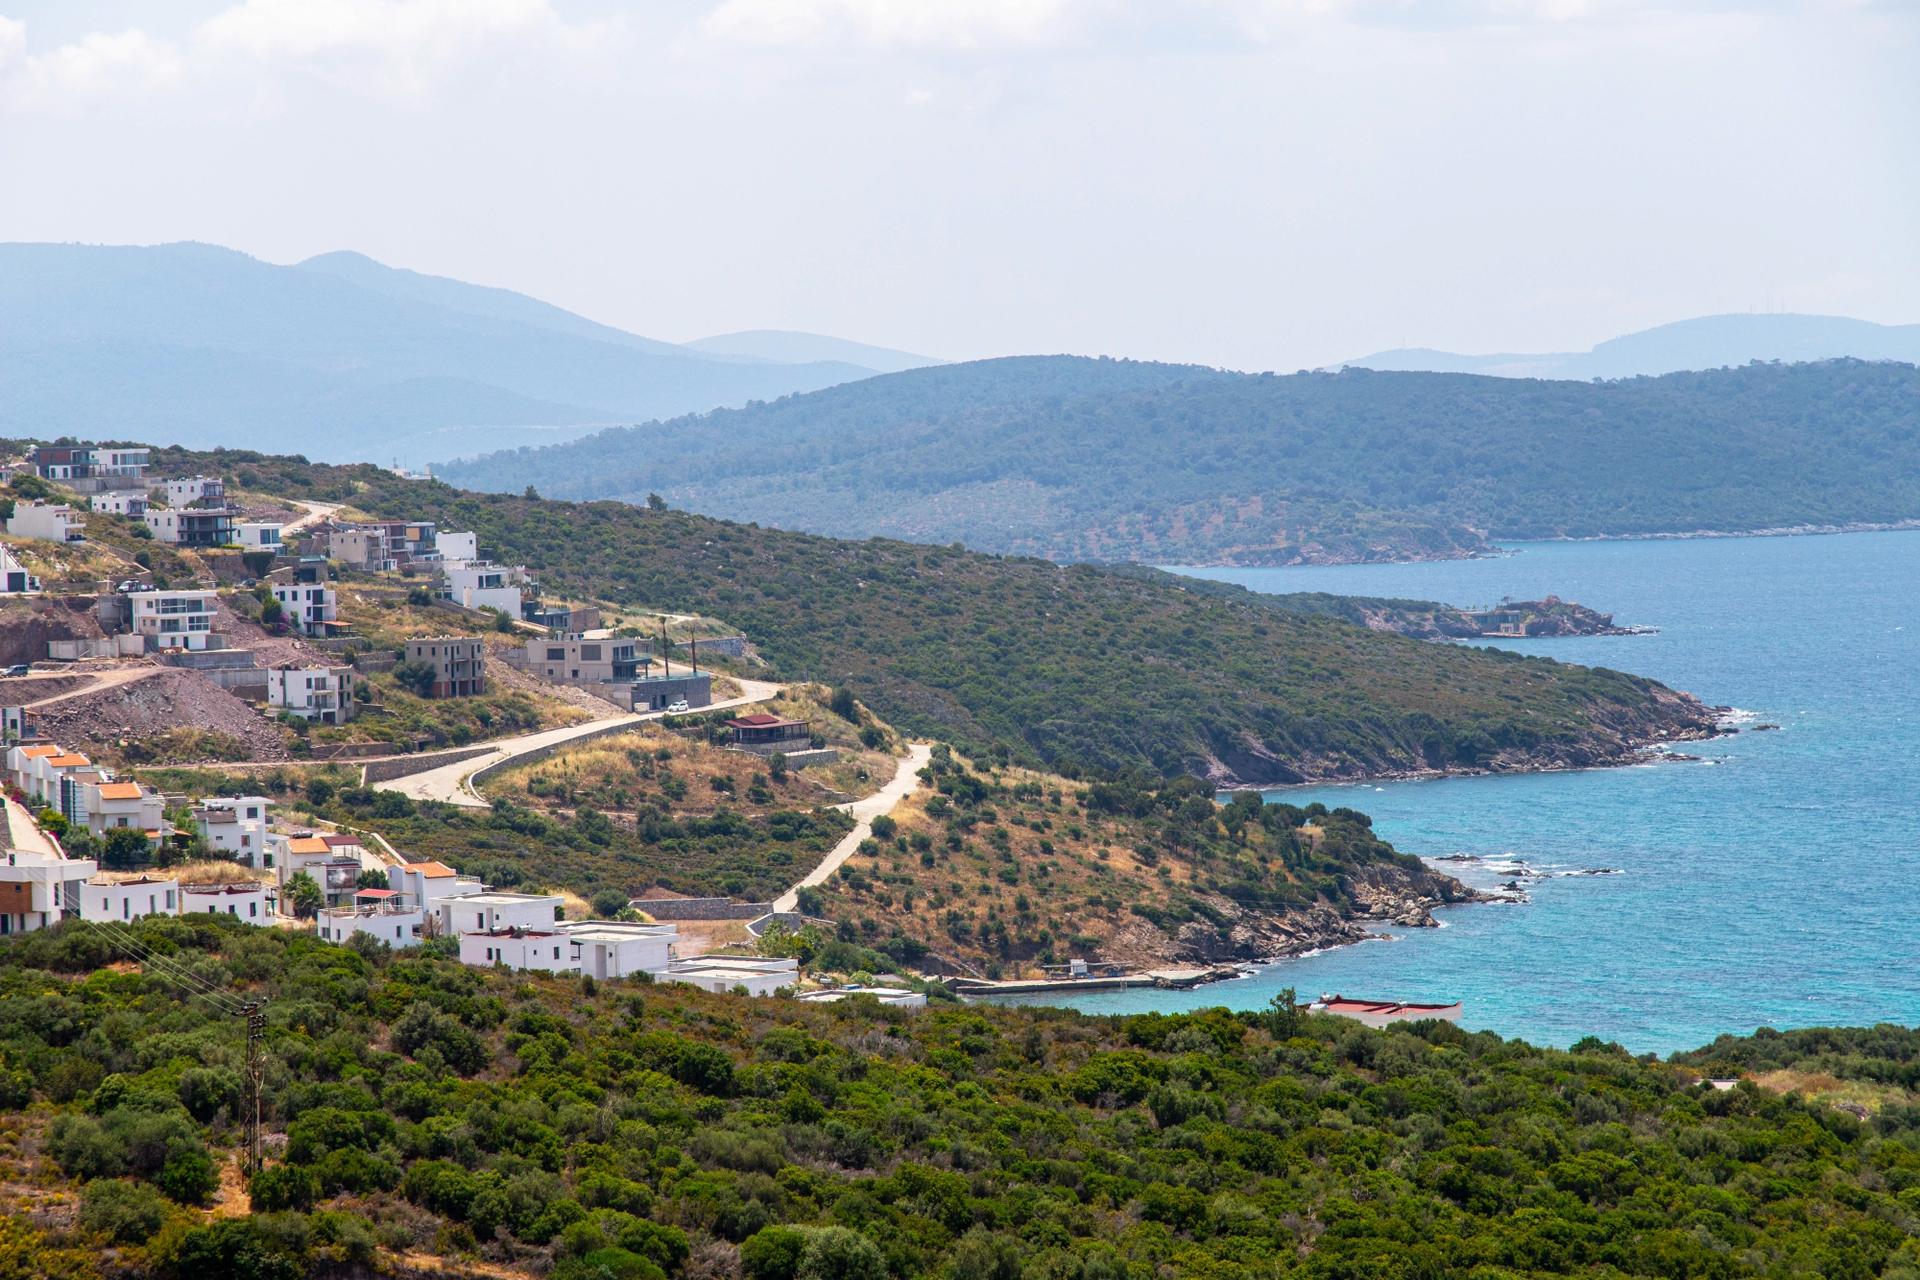 The mesmerizing beauty of the Aegean Sea beckons you to explore its crystal-clear waters and sandy beaches.